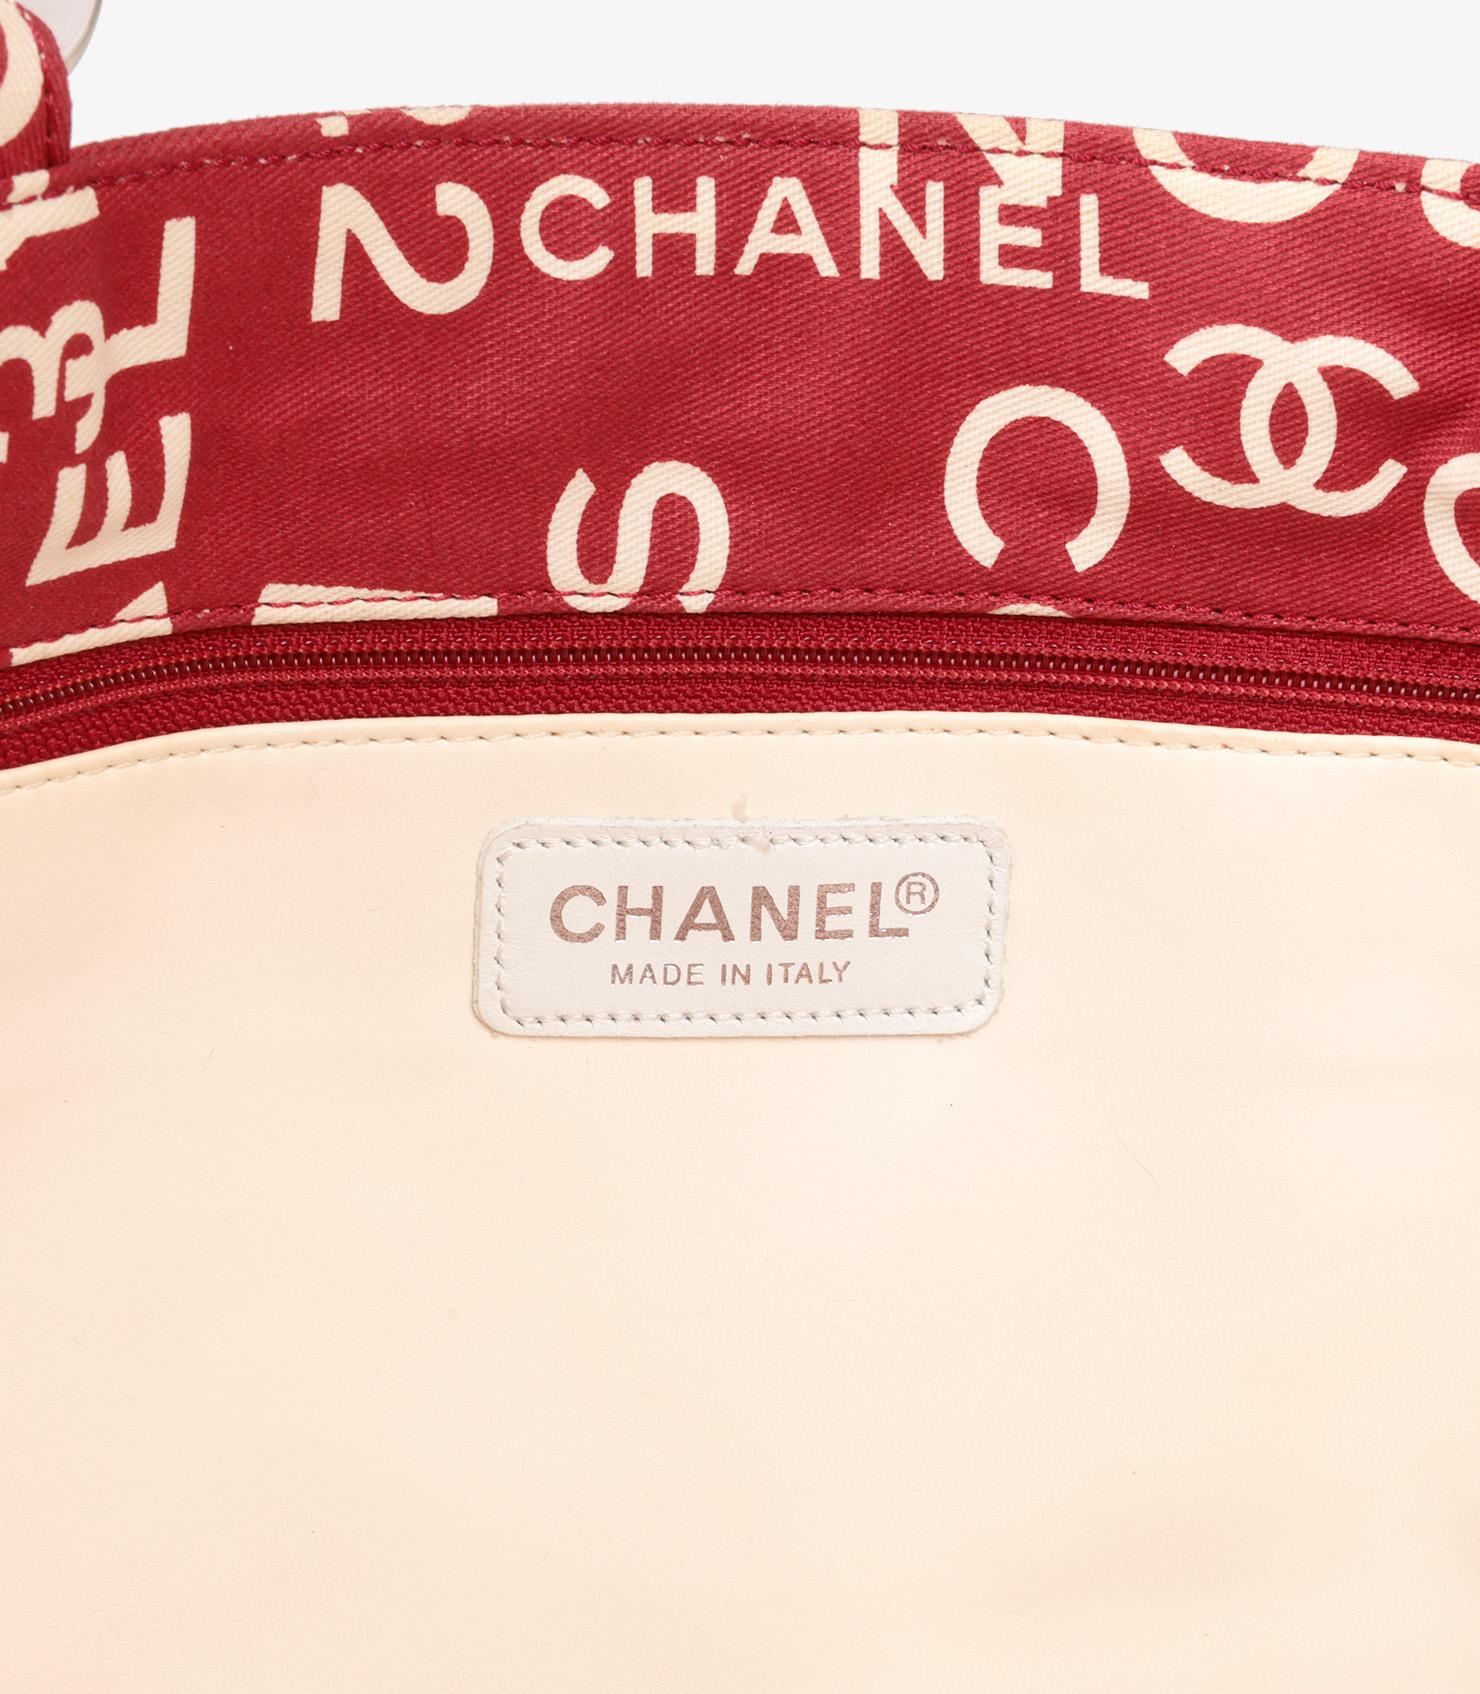 Chanel Red & White Patterned Canvas Vintage 31 Rue Cambon Beach Tote 4